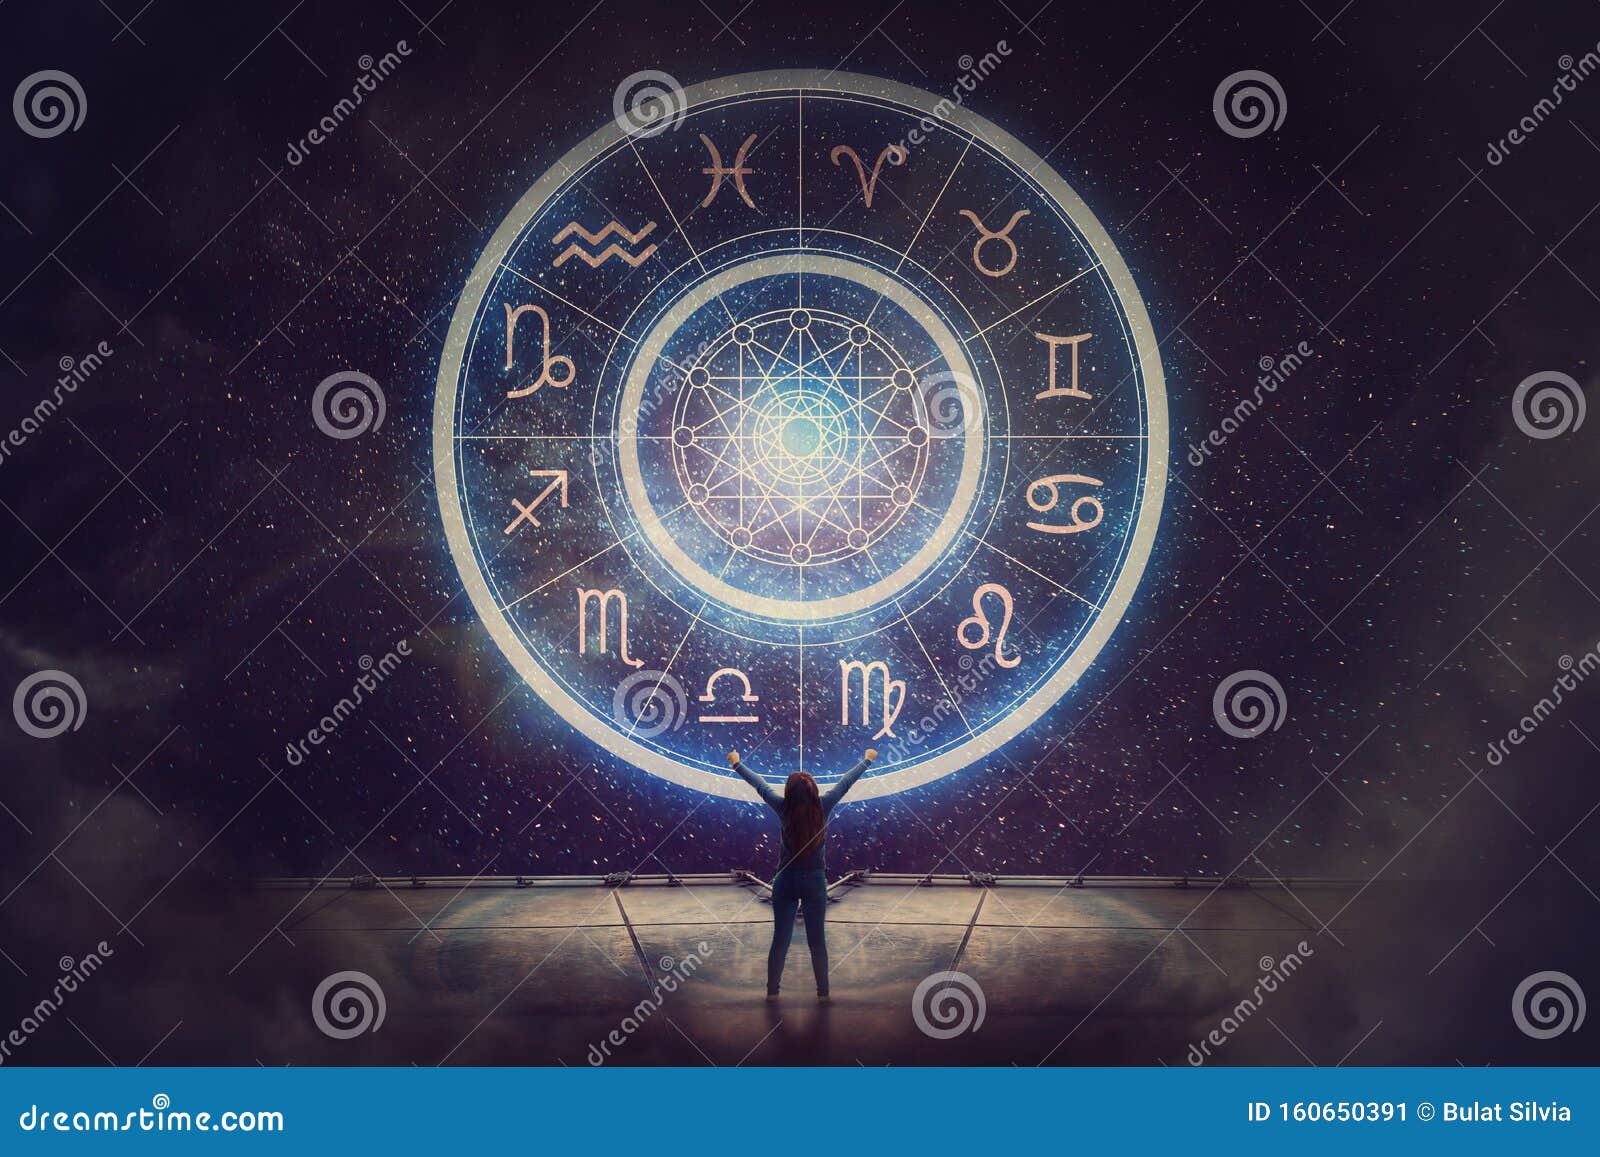 woman raising hands looking at the night sky. astrological wheel projection, choose a zodiac sign. trust horoscope future